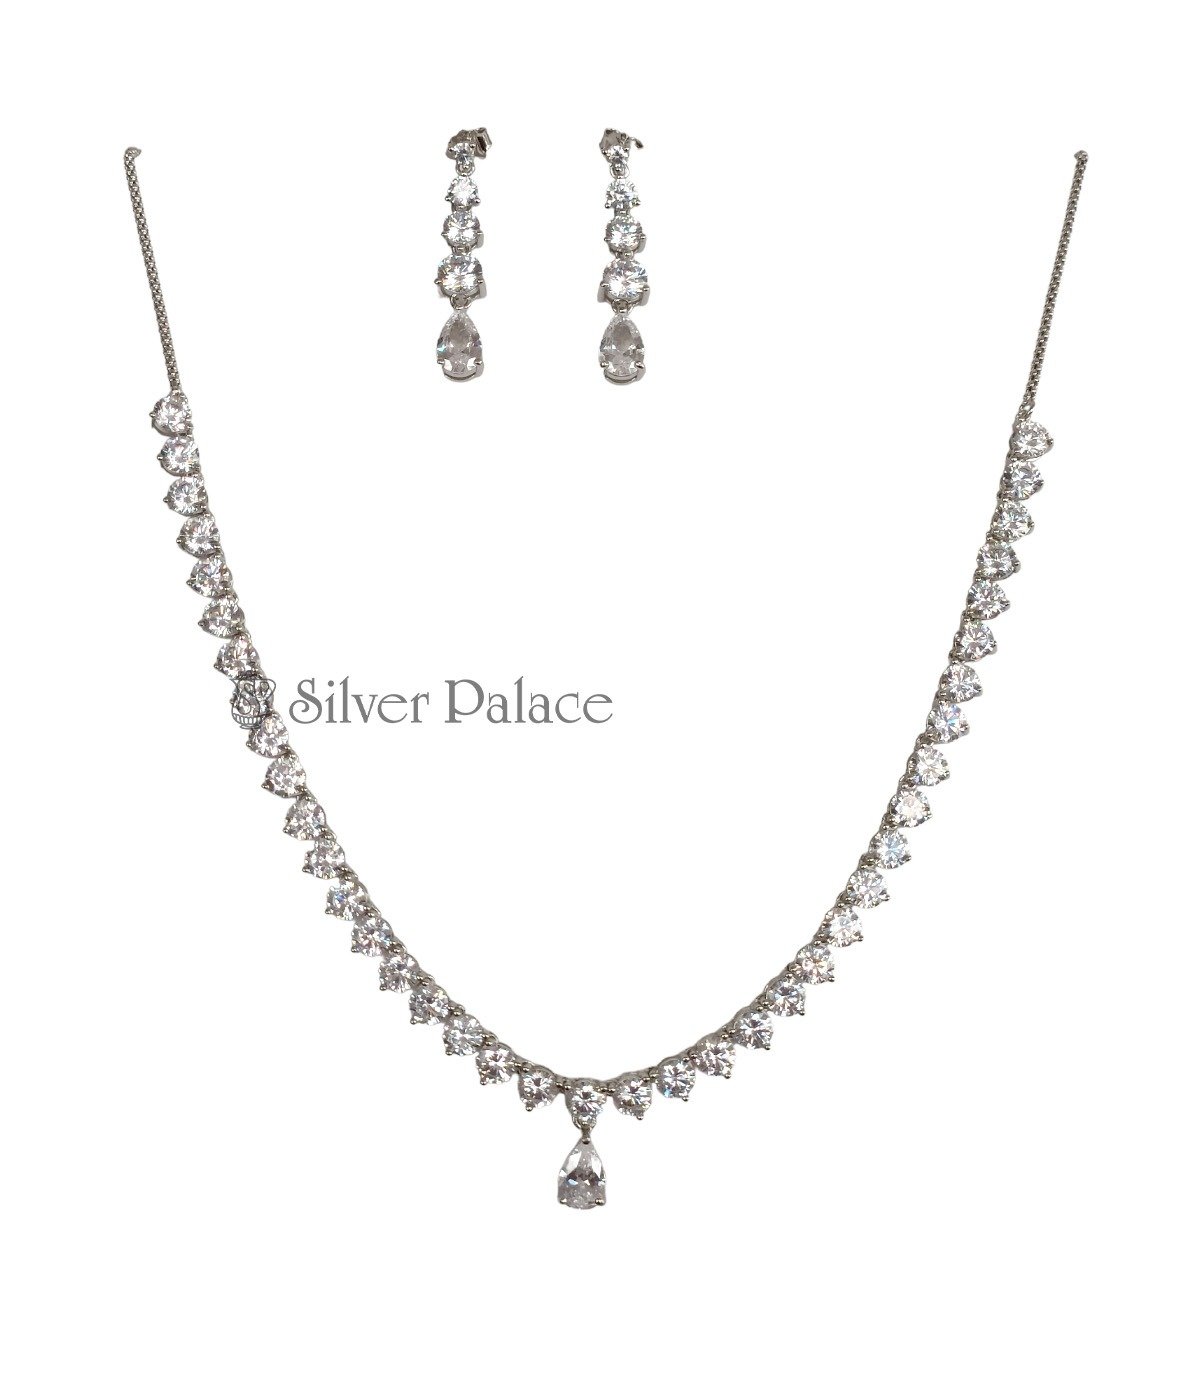 STERLING SILVER STYLISH SOLITAIRE NECKLACE